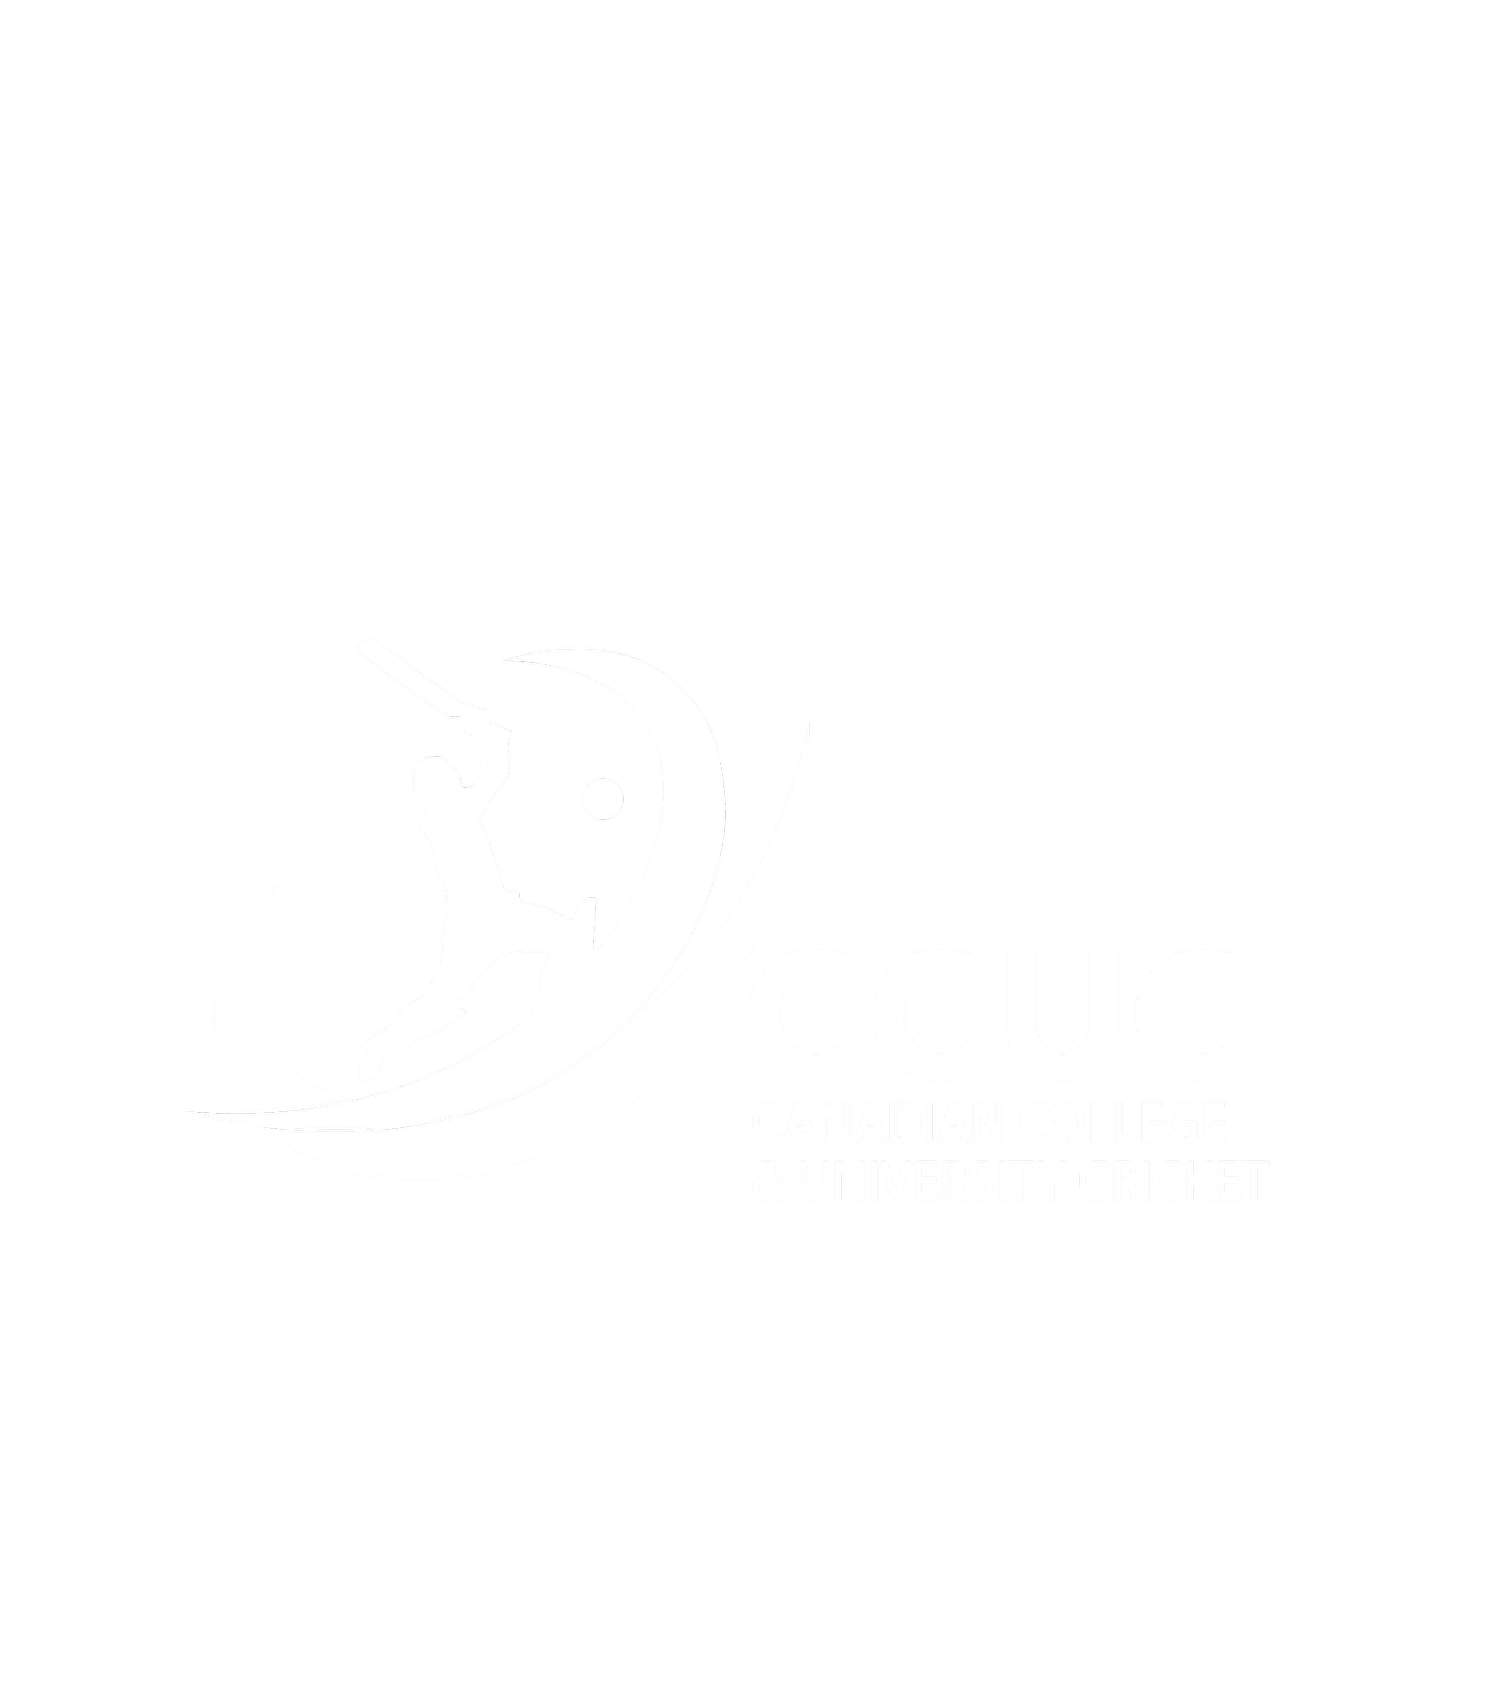 Canadian College and University Cricket